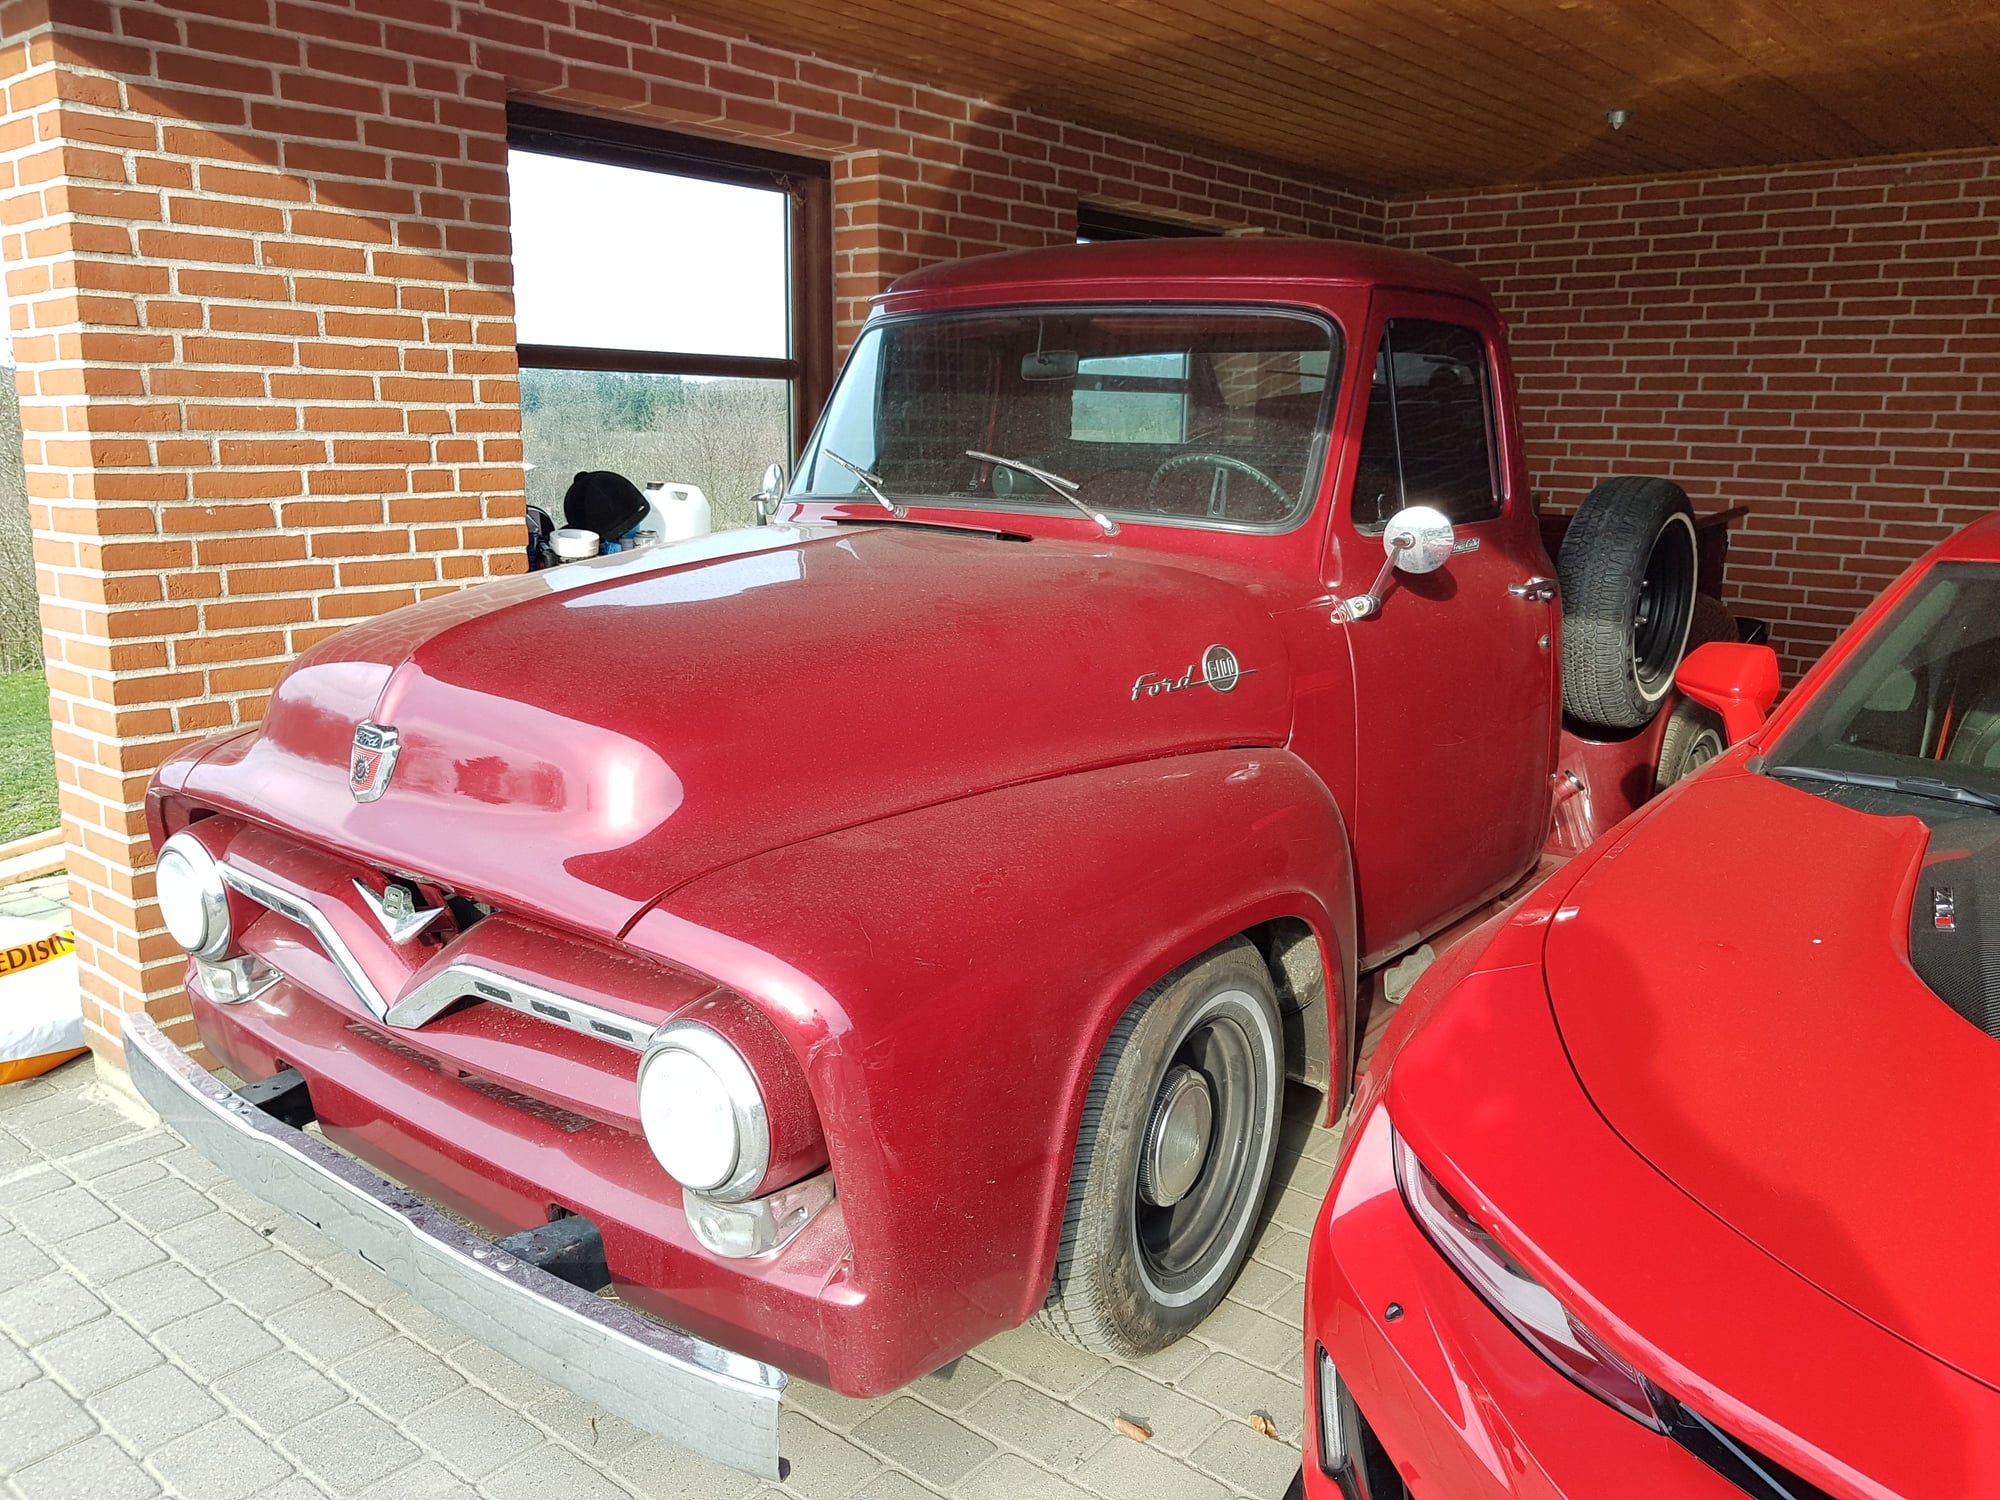 F100 data plate gone.. please help - Ford Truck Enthusiasts Forums